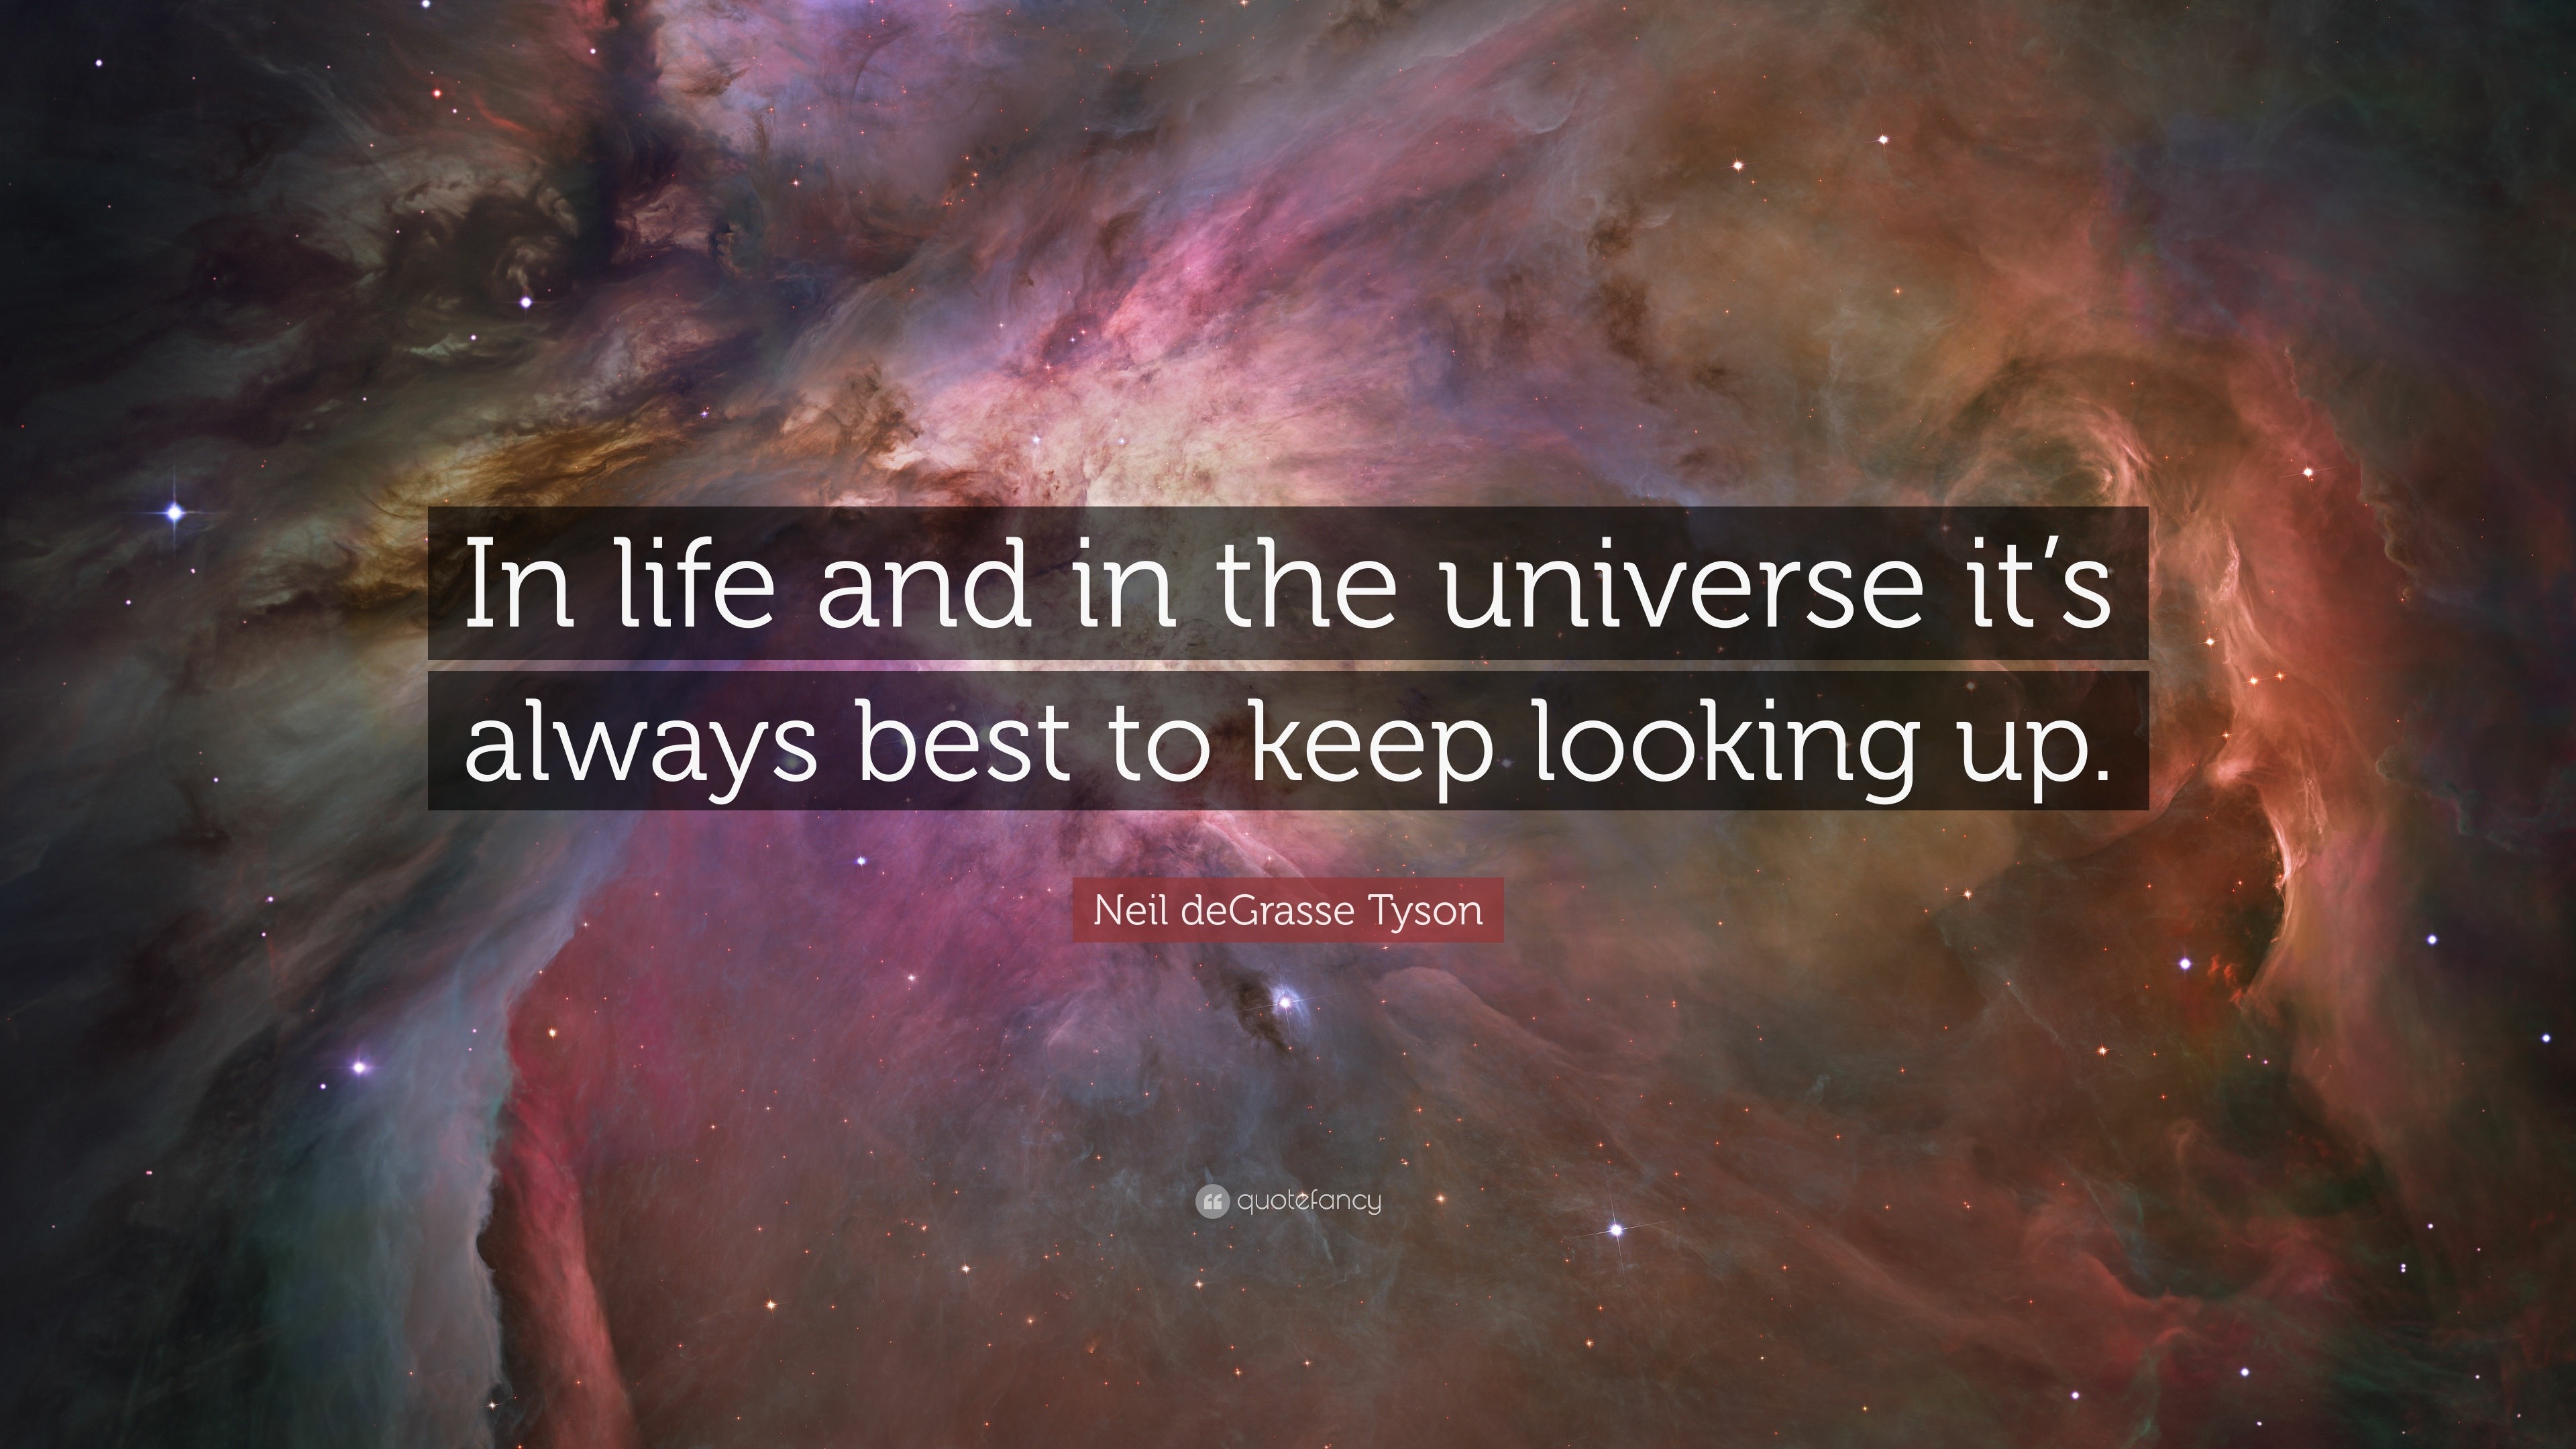 Neil Degrasse Tyson Quote In Life And In The Universe It S Always Best To Keep Looking